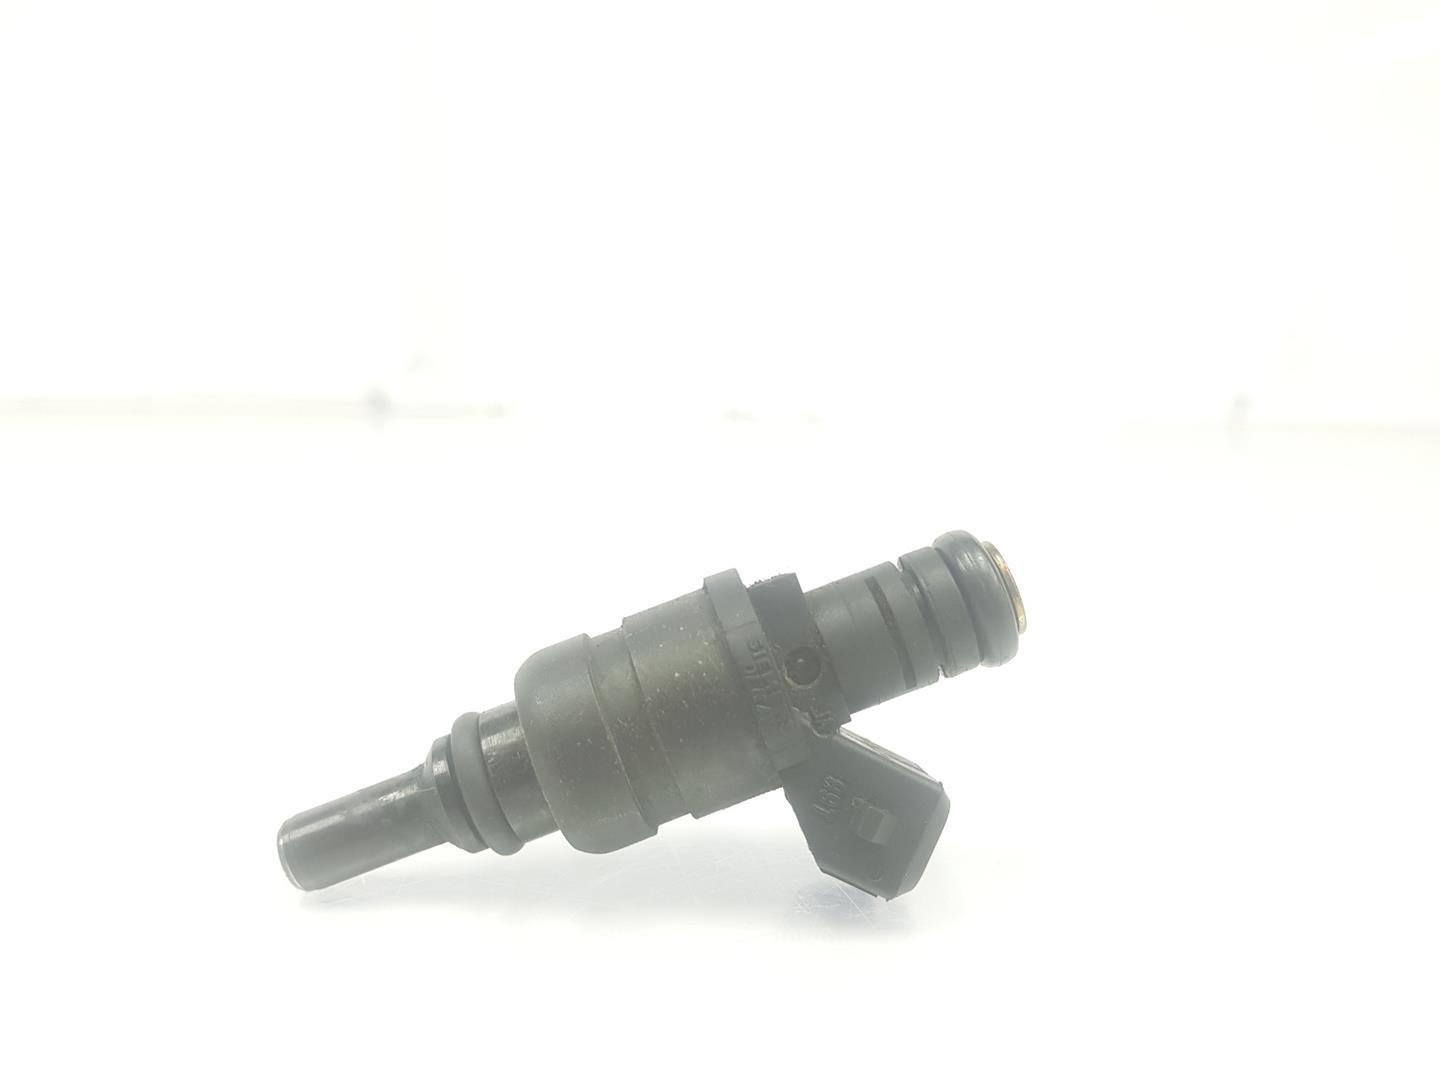 BMW 3 Series E46 (1997-2006) Fuel Injector 11001714564, 1714564 24193782